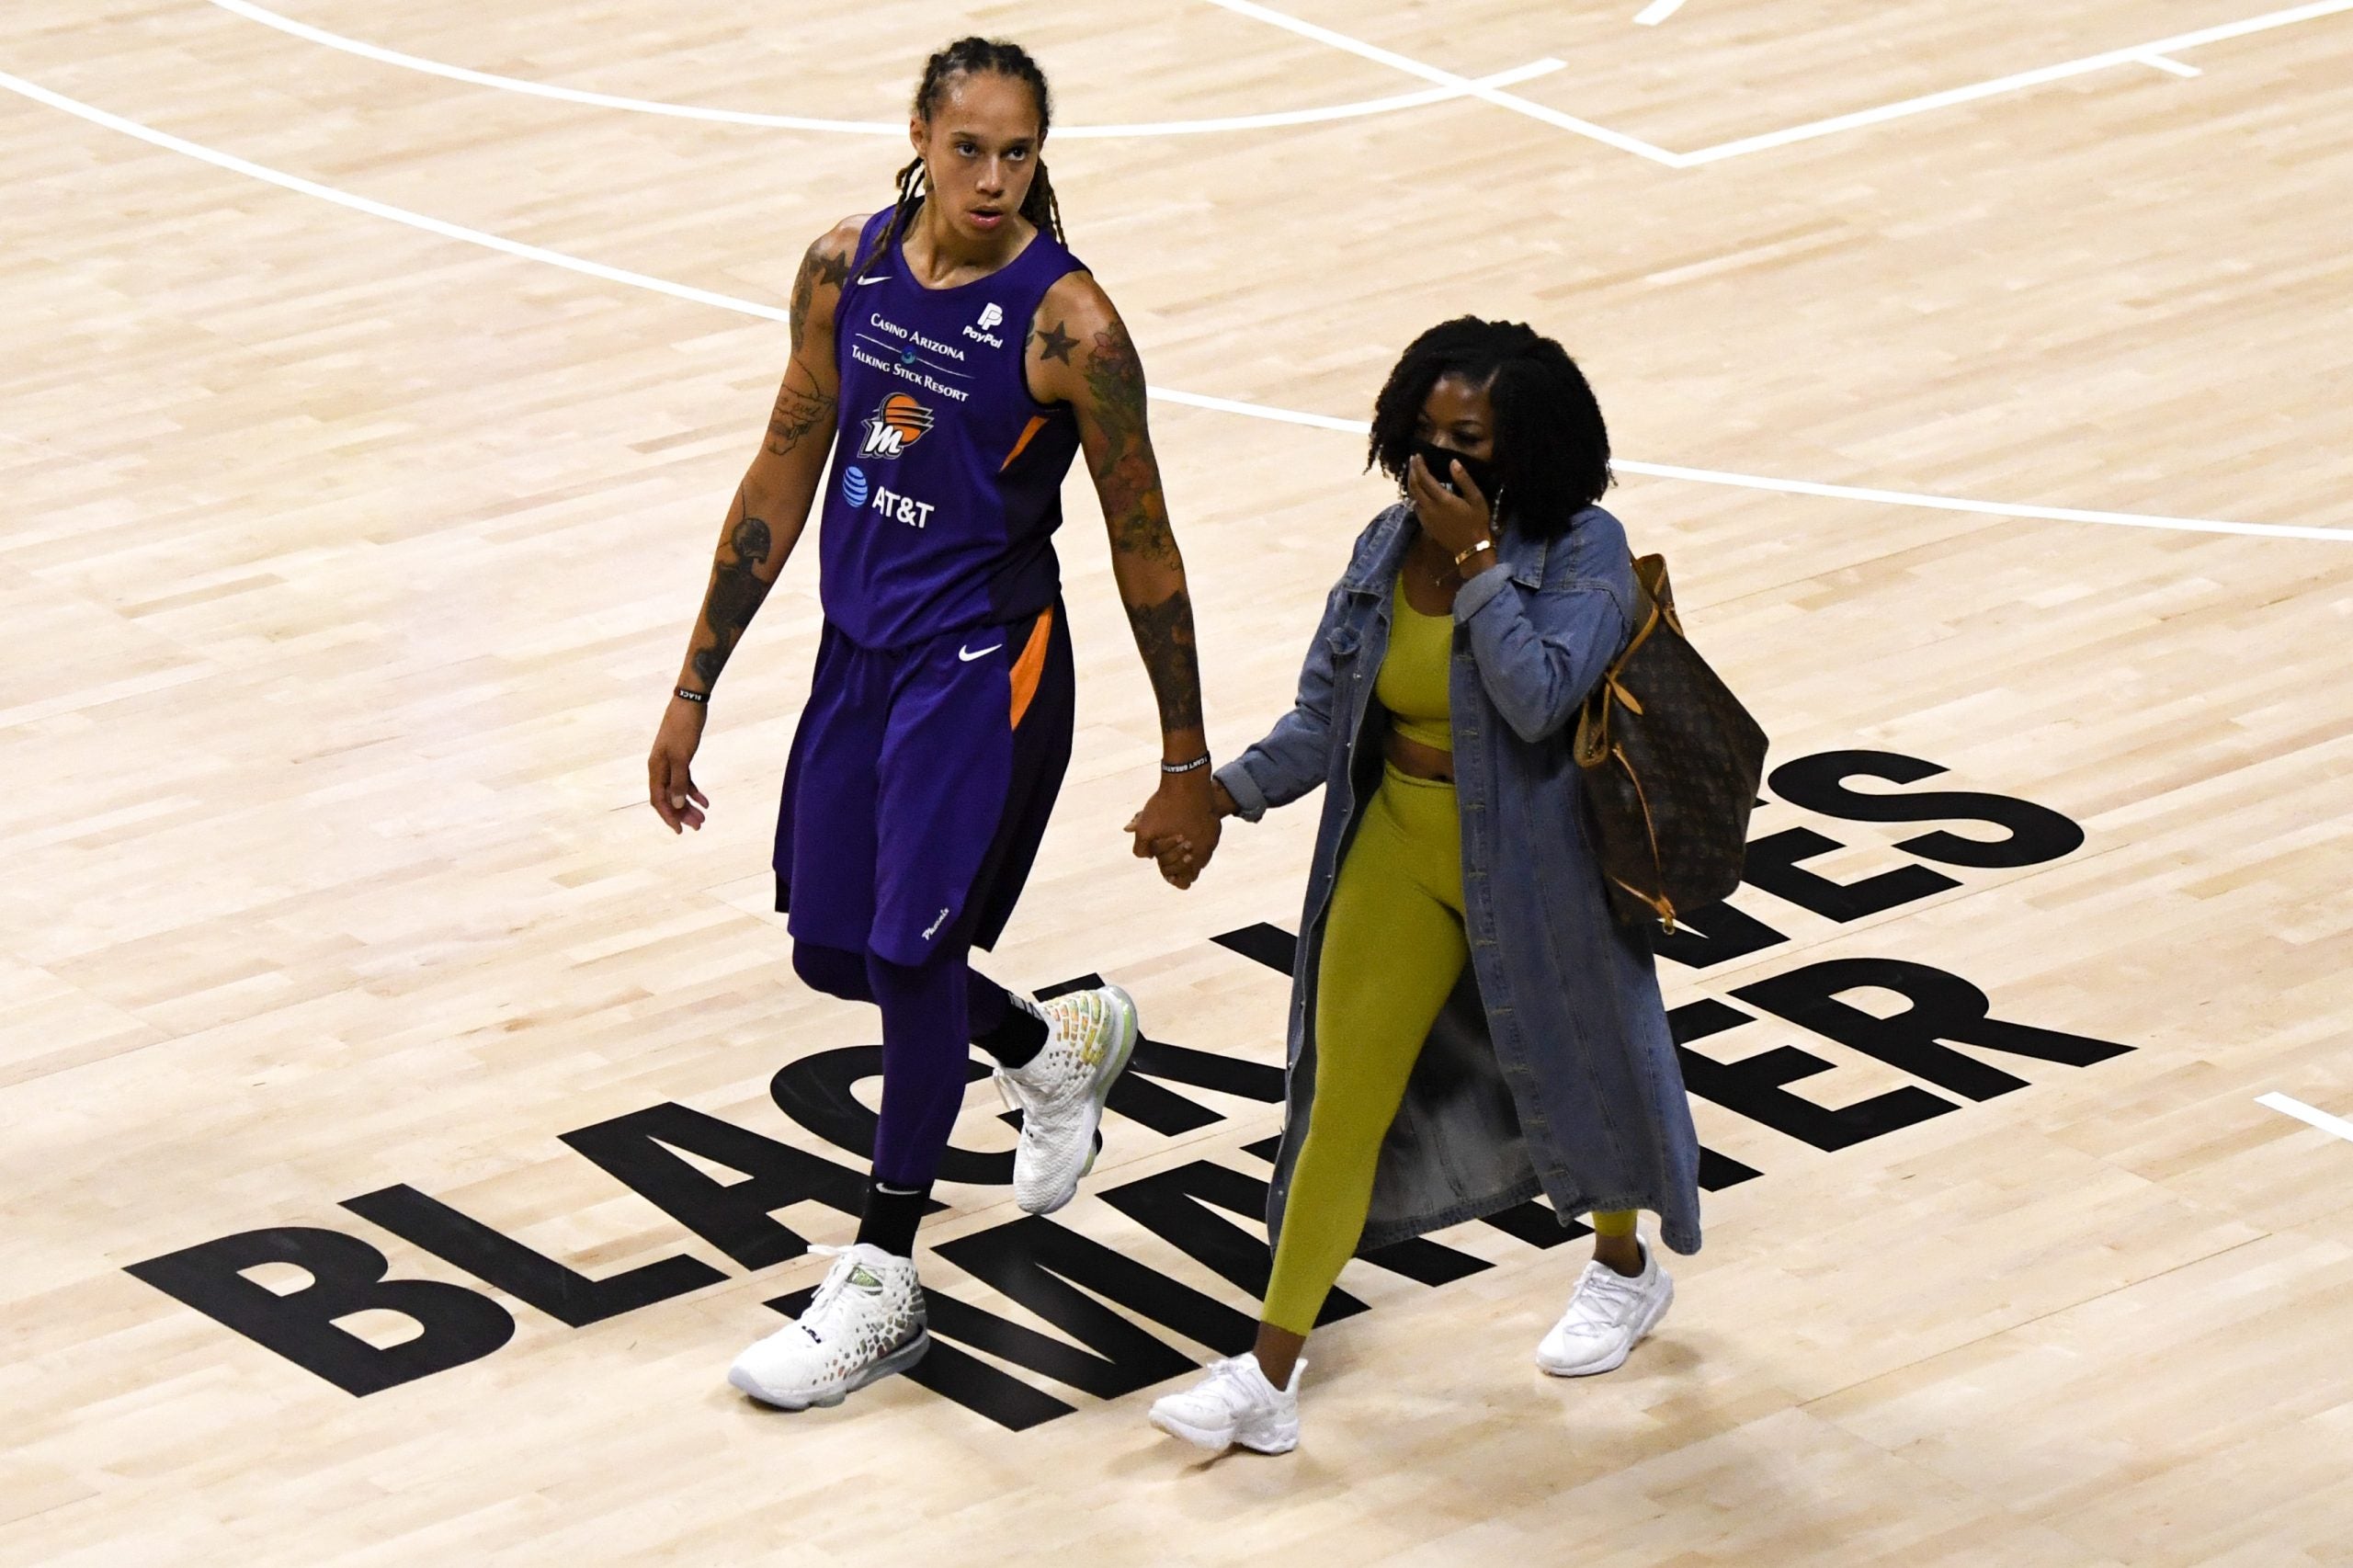 ‘There Are No Words To Express This Pain’: Brittney Griner’s Wife Speaks Out About Her Detainment In Russia